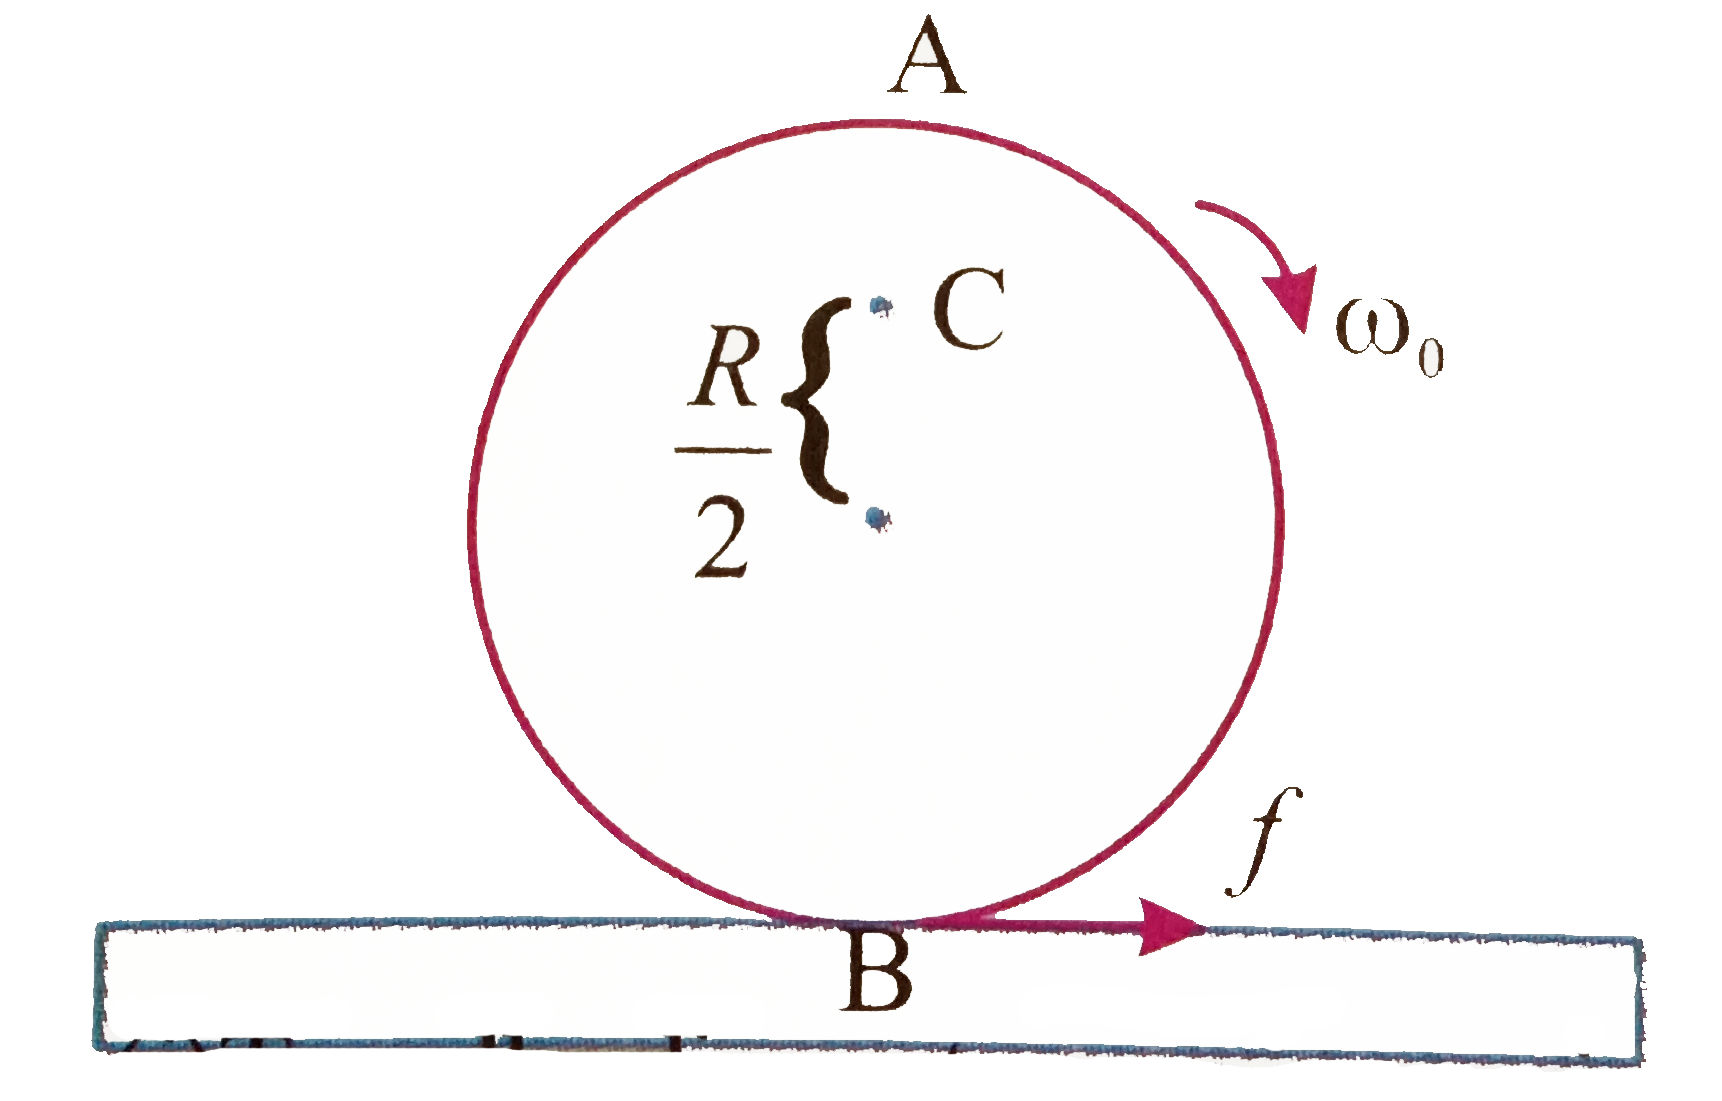 (i) Explain why friction is necessary to make the disc to roll in the direction indicated. (ii) Give the direction of frictional force at B, and the sense of frictional torque, before perfect rolling begins. (iii) What is the force of friction after perfect rolling begins?